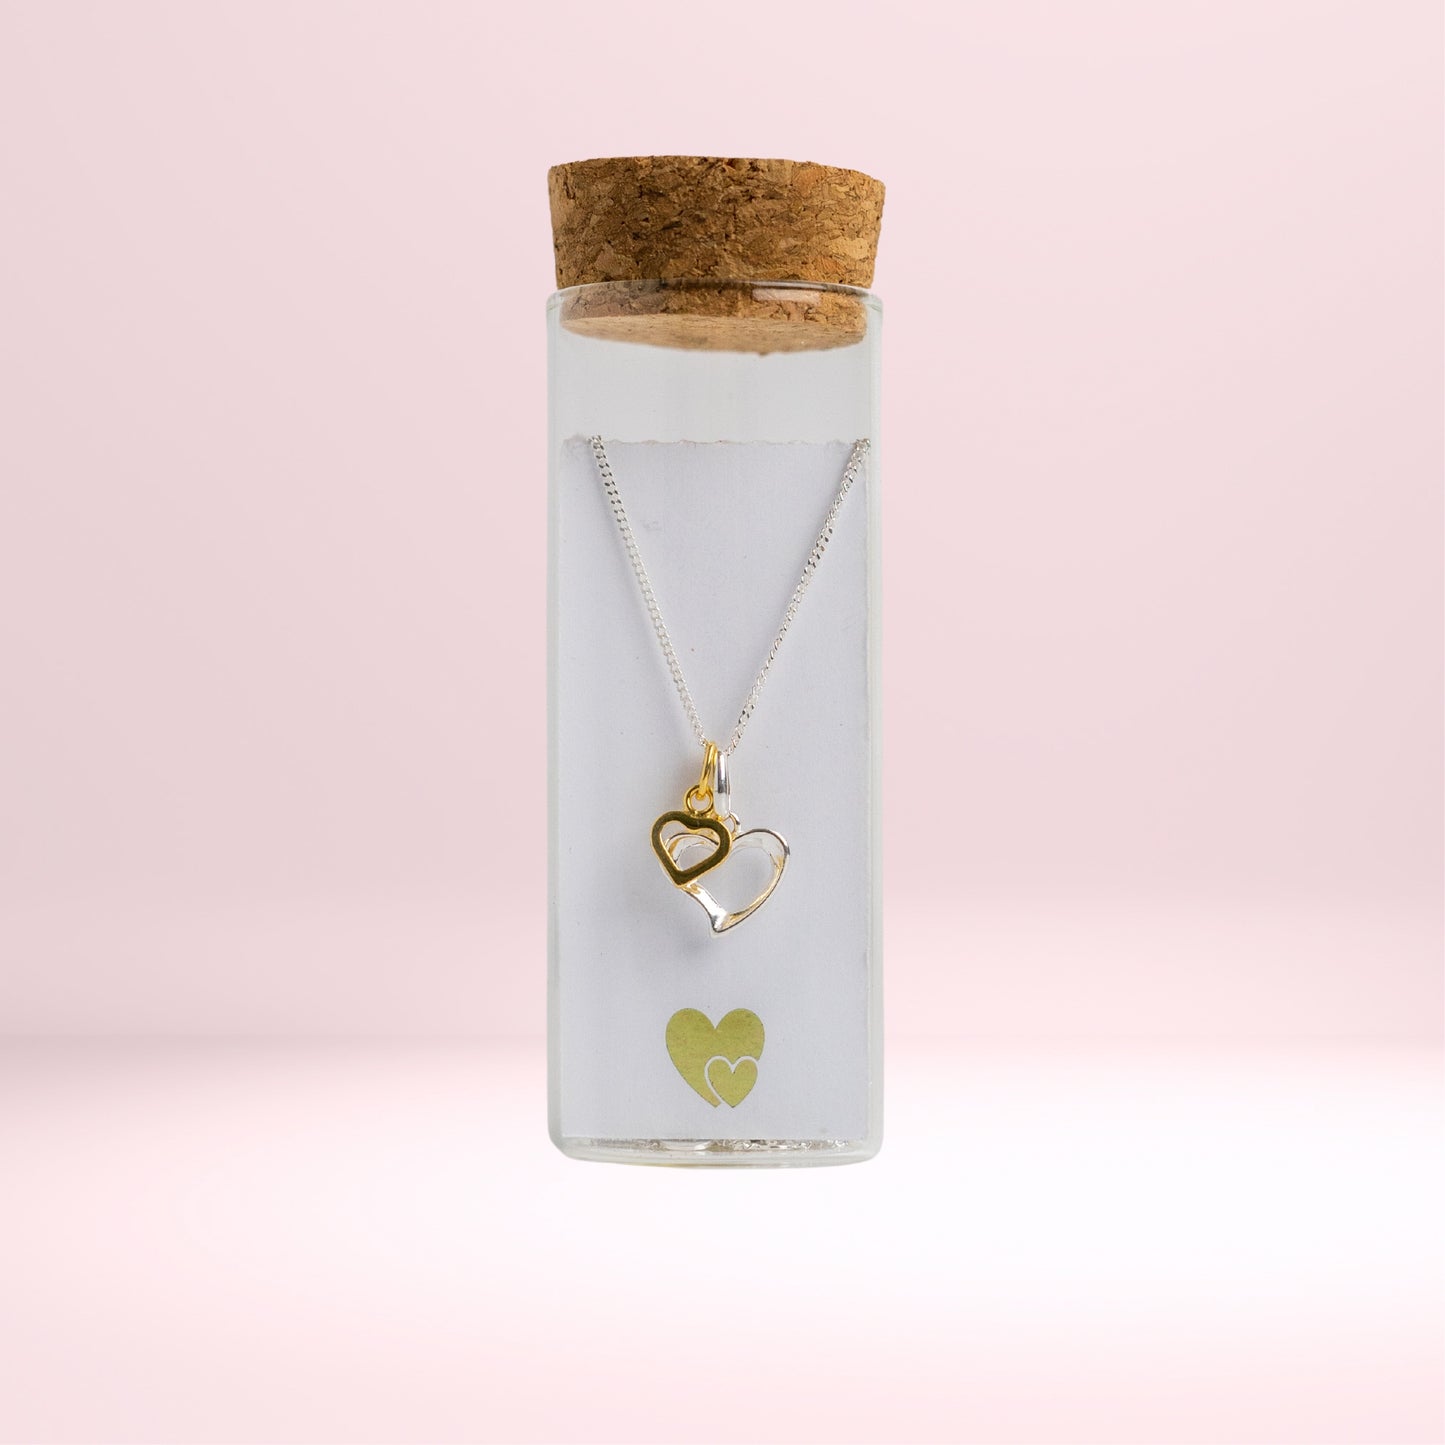 Message in a Bottle jewellery. A sterling silver heart is twinned with a smaller gold vermeil heart and suspended from a 16-18" sterling silver chain. The necklace is placed in a small glass bottle that includes a scroll personalised with a message of your choice.